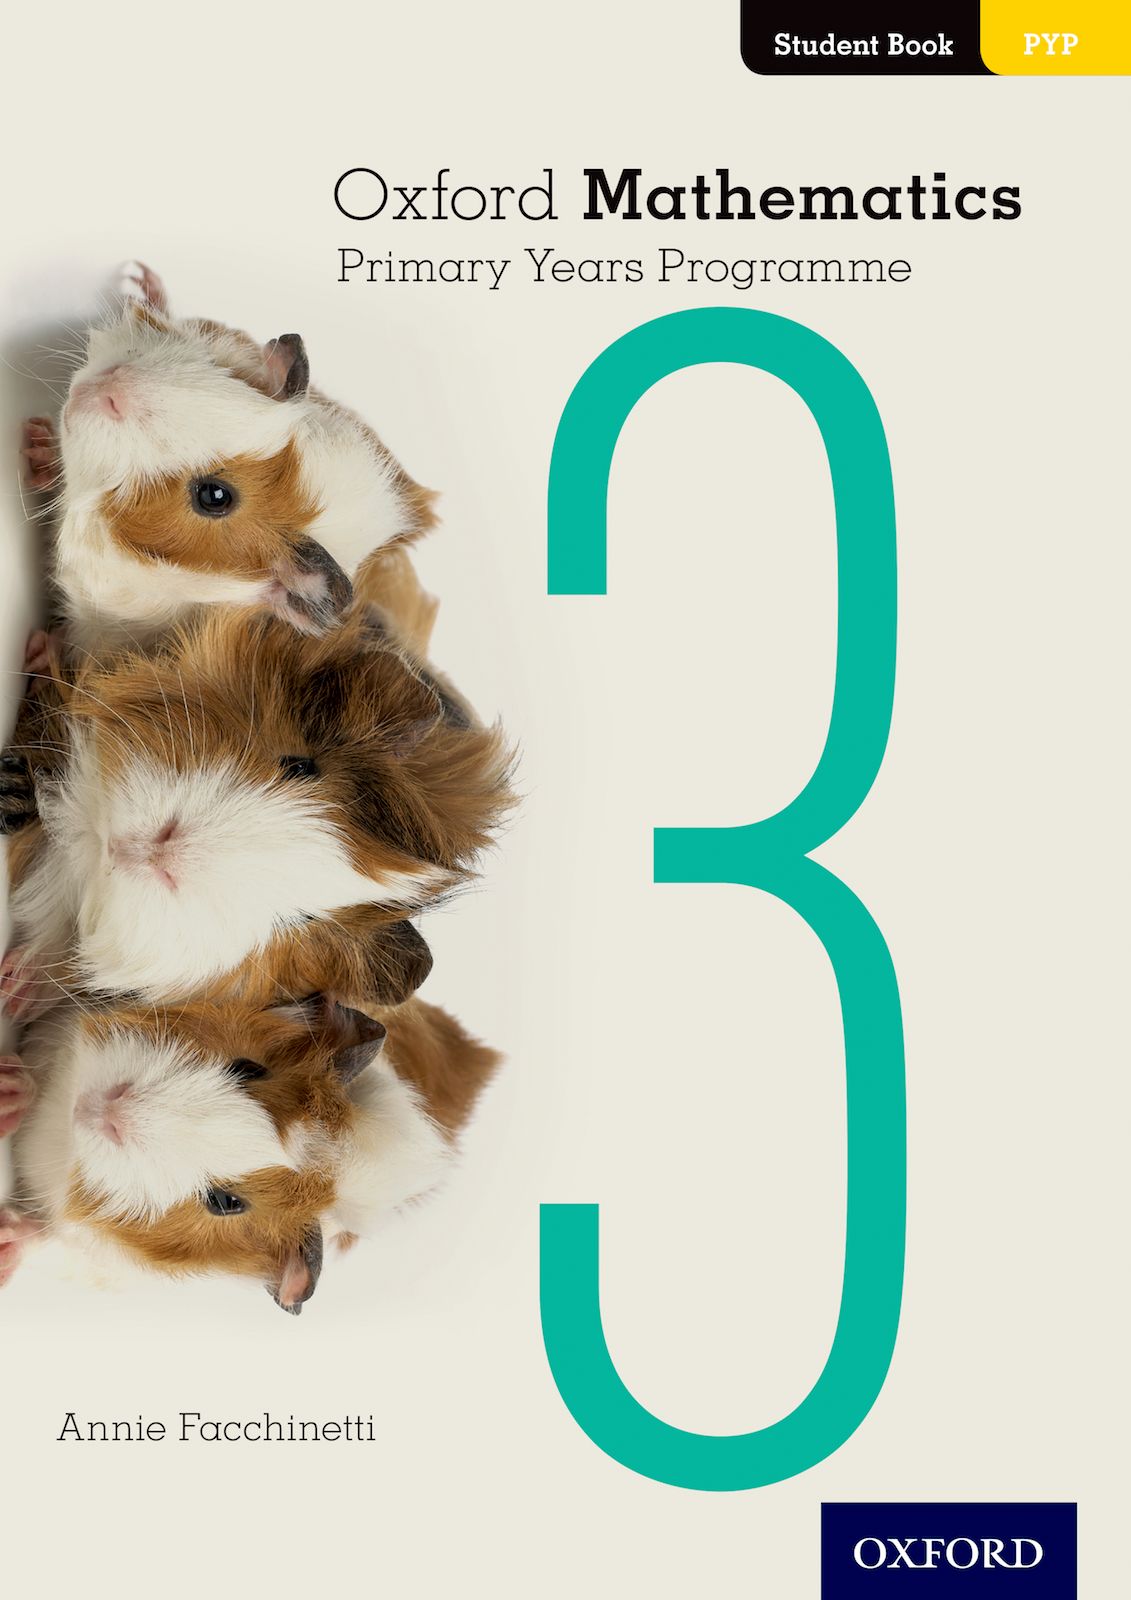 Featured image for “Oxford Mathematics Primary Years Programme Student Book 3”